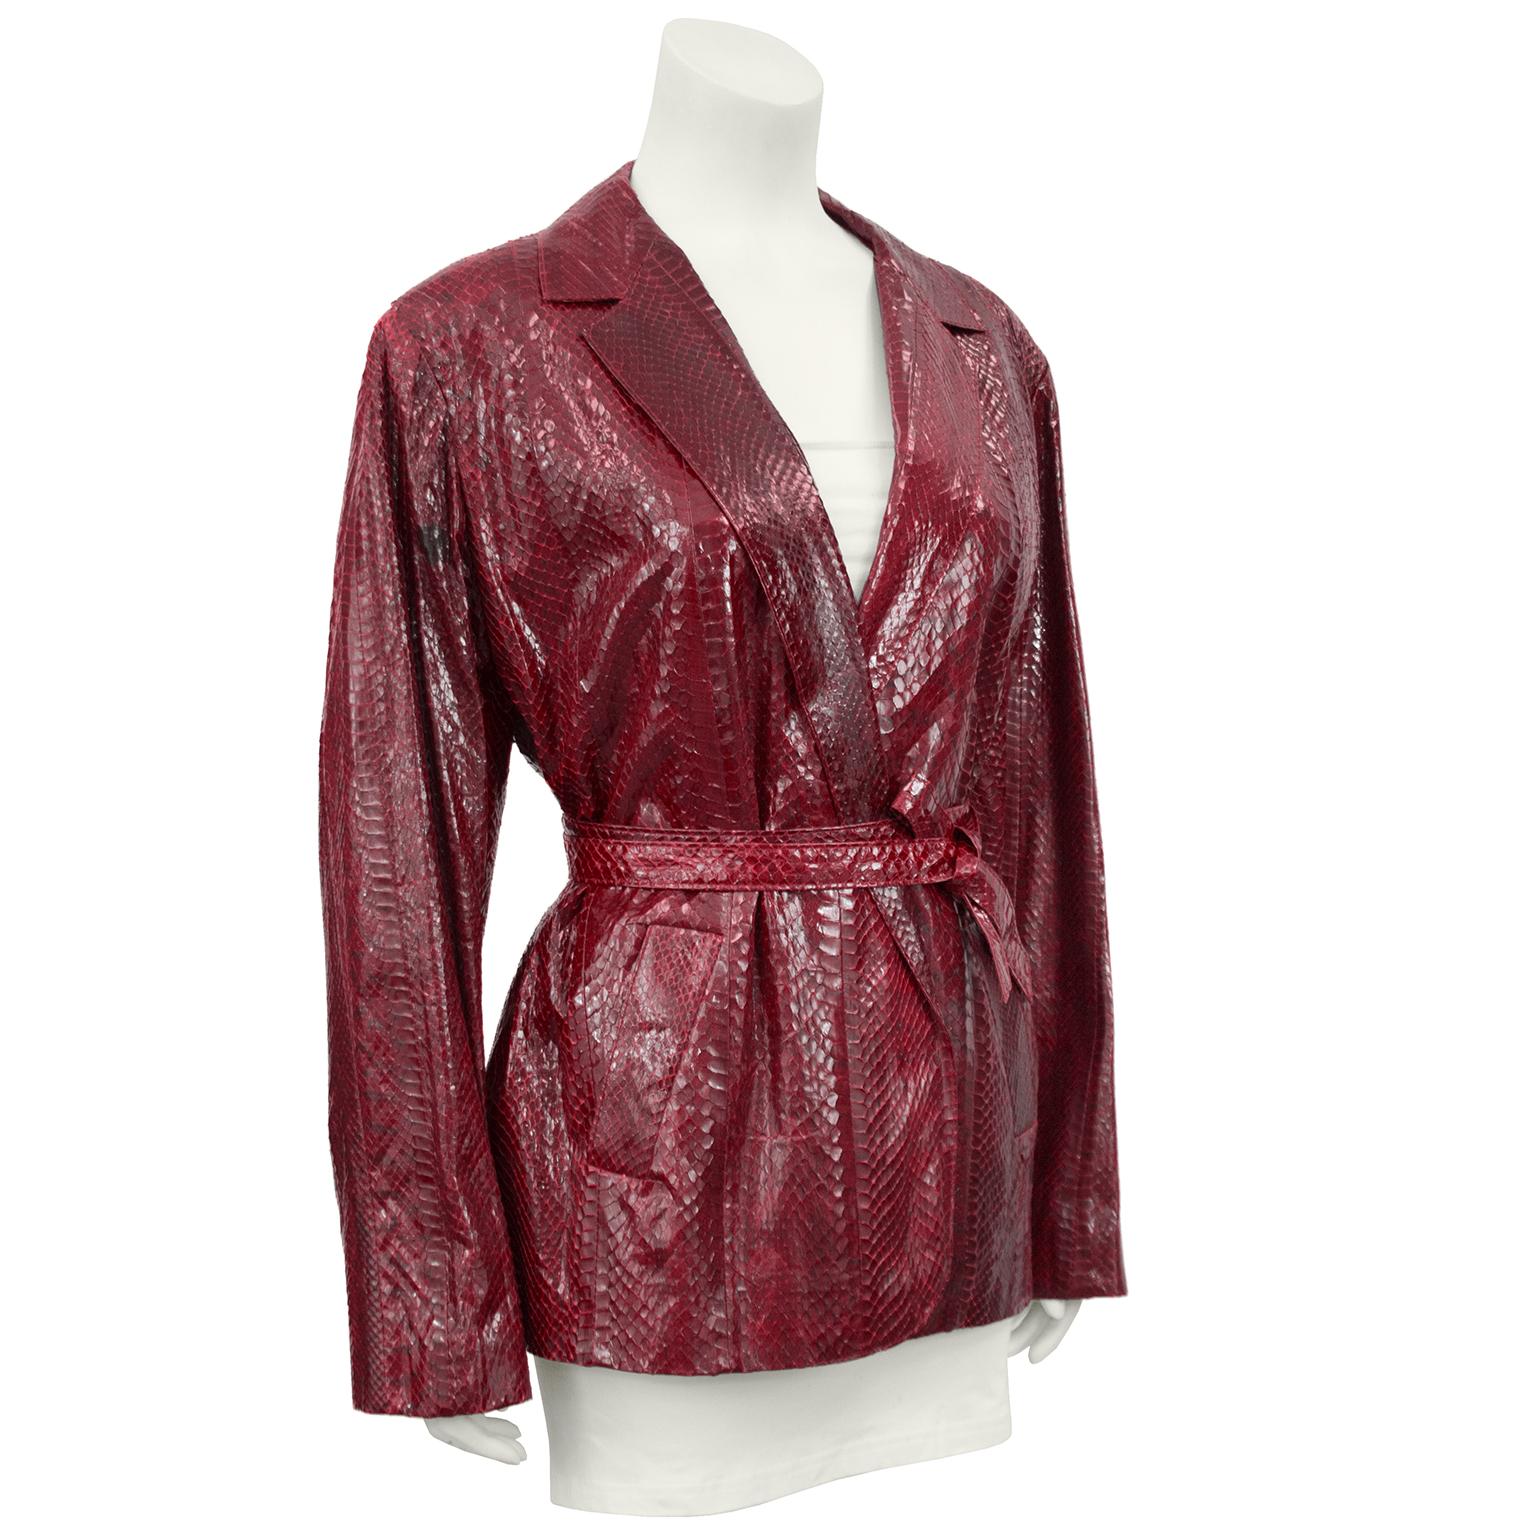 Anonymous glossy snakeskin oversized blazer in deep bordeaux from the 1980s. The jacket has a notched lapel and side slit pockets on the hips. The jacket and pockets are lined in matching satin. Belt ties at waist, meant to be oversized. In